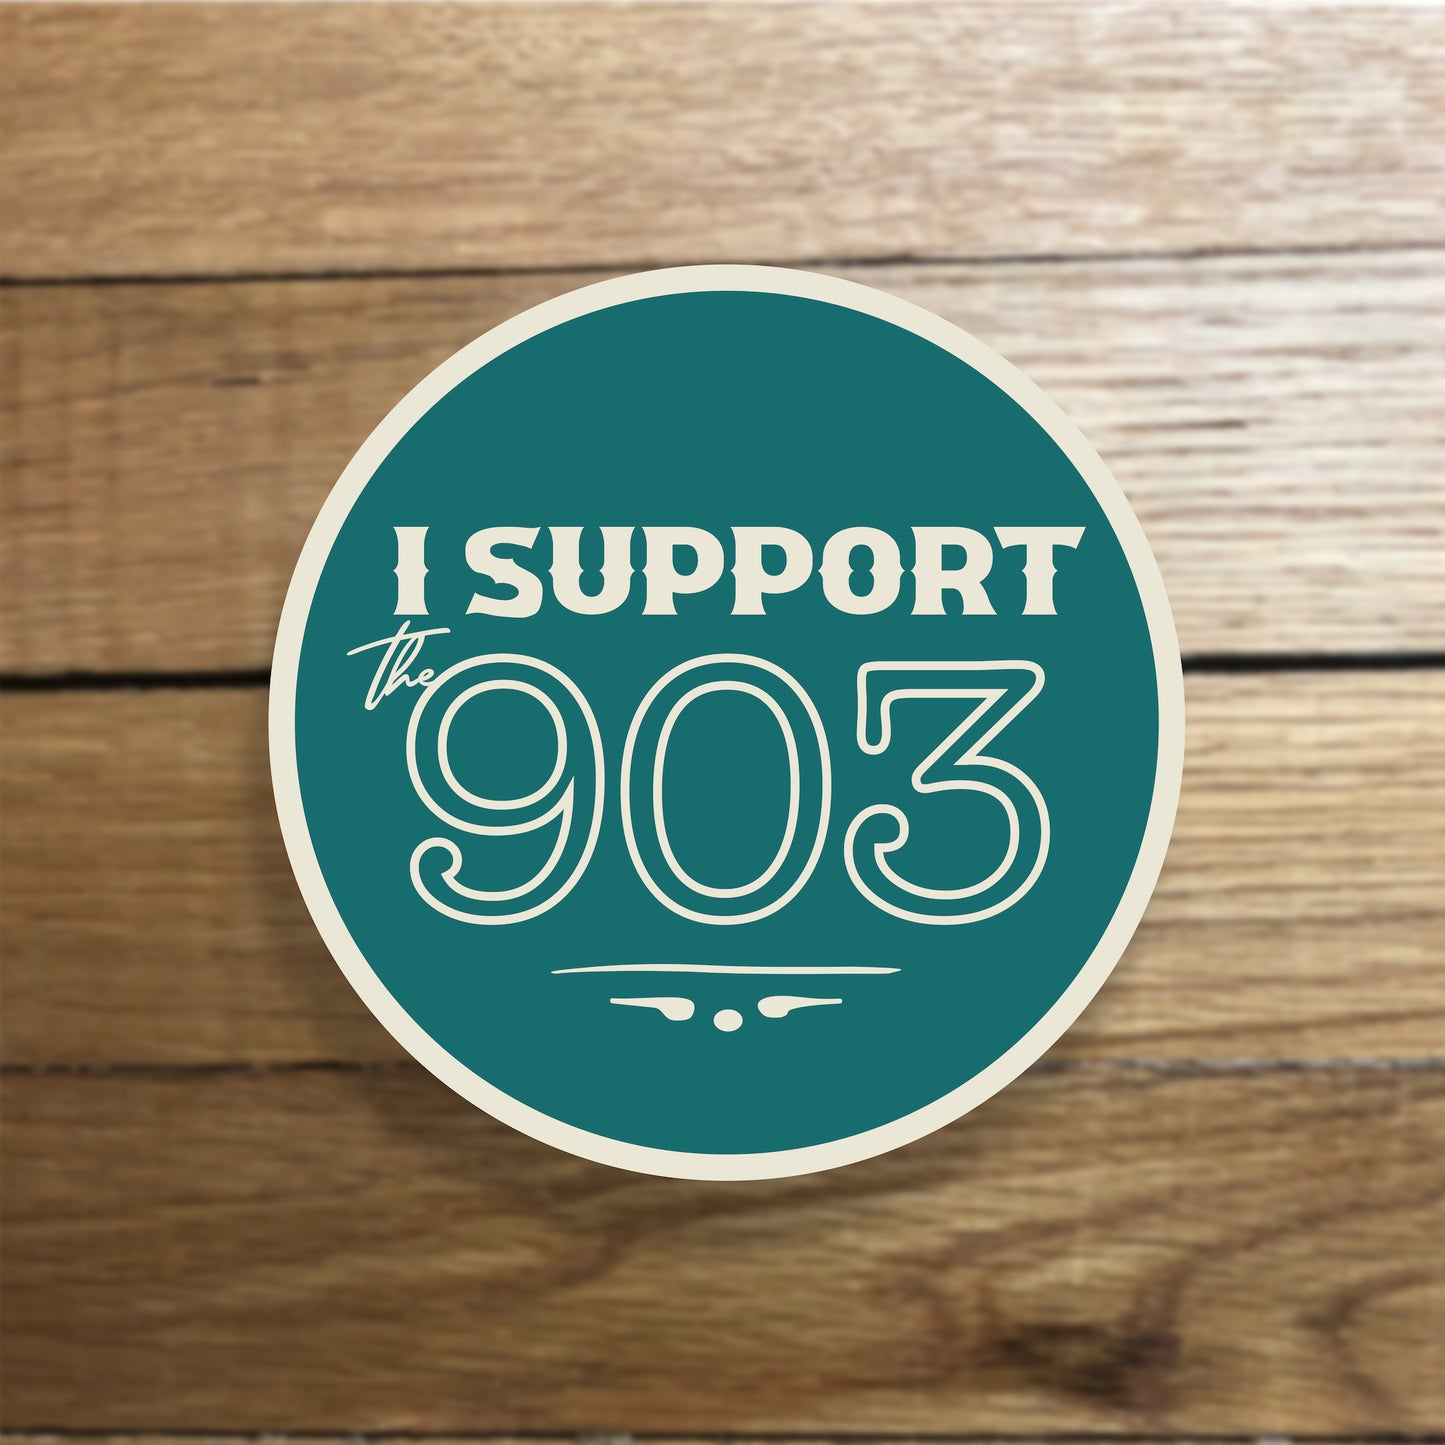 'I Support the 903' sticker